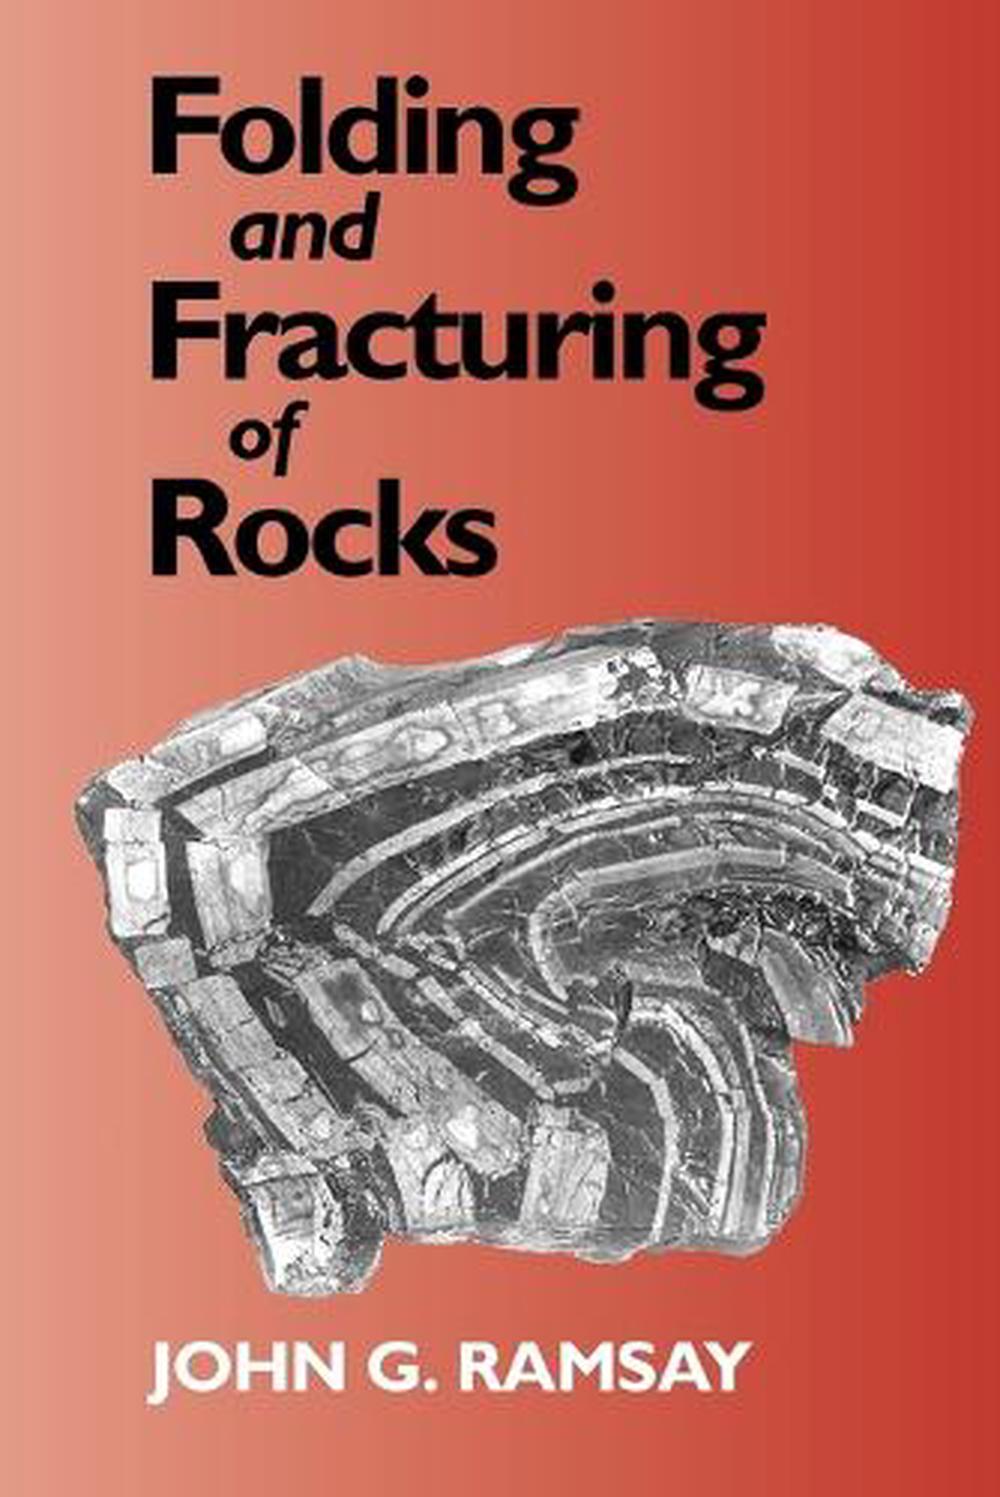 Folding and Fracturing of Rocks by John G. Ramsay (English) Paperback